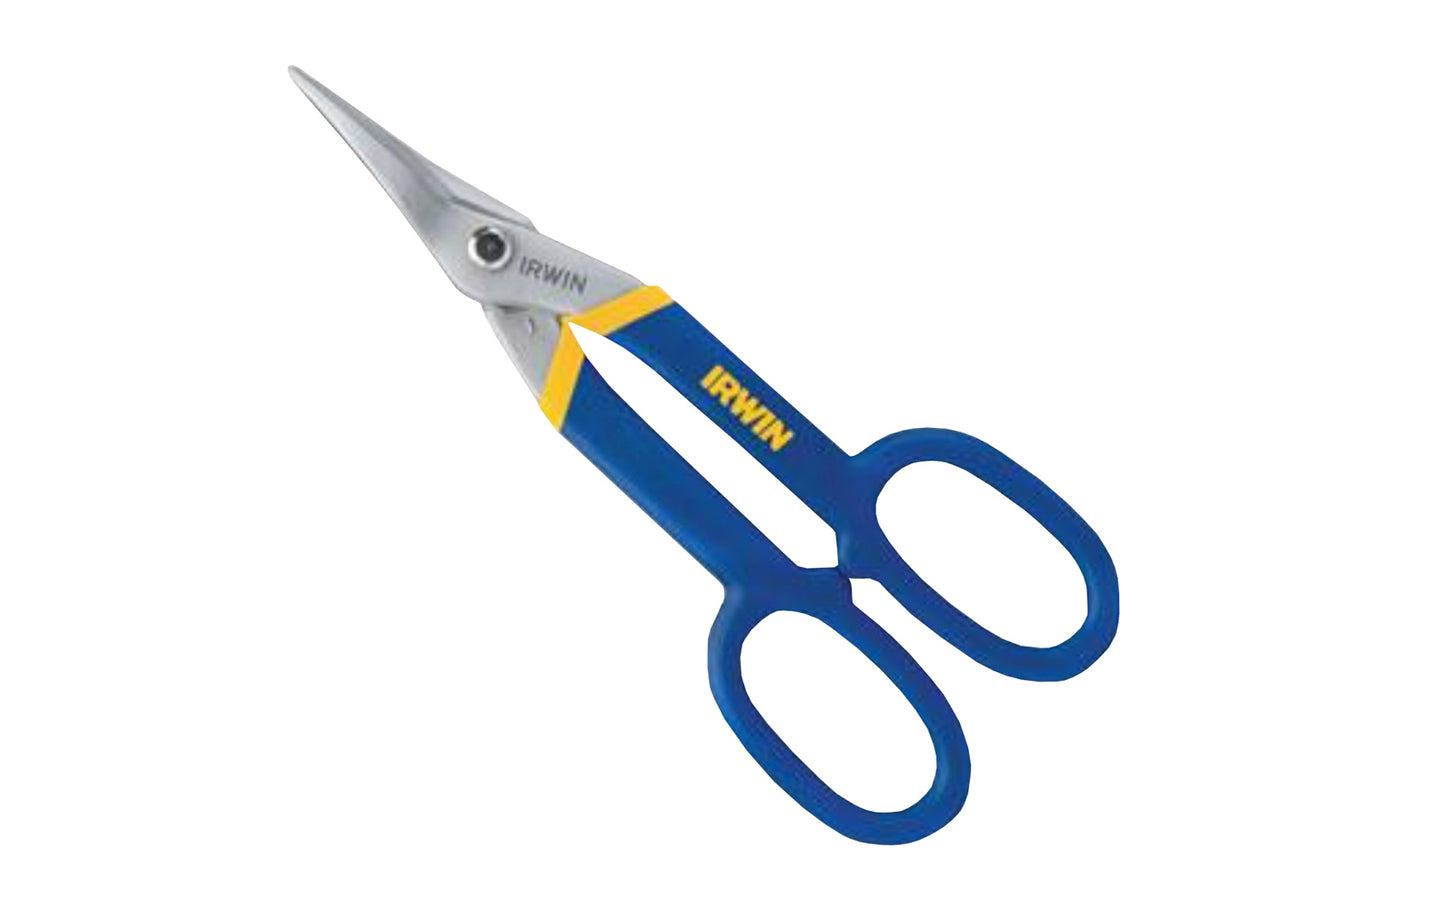 Irwin 10" Tinner Snips - Ducktail Blade Cuts Straight & Tight Curves. Precision-ground edges on blades ensure a tight grip on each cut for superior cutting quality. Hot drop-forged steel blades provide maximum strength and long life. The handle grips provide superior comfort & resist twisting. Model 23010. Tin Snips